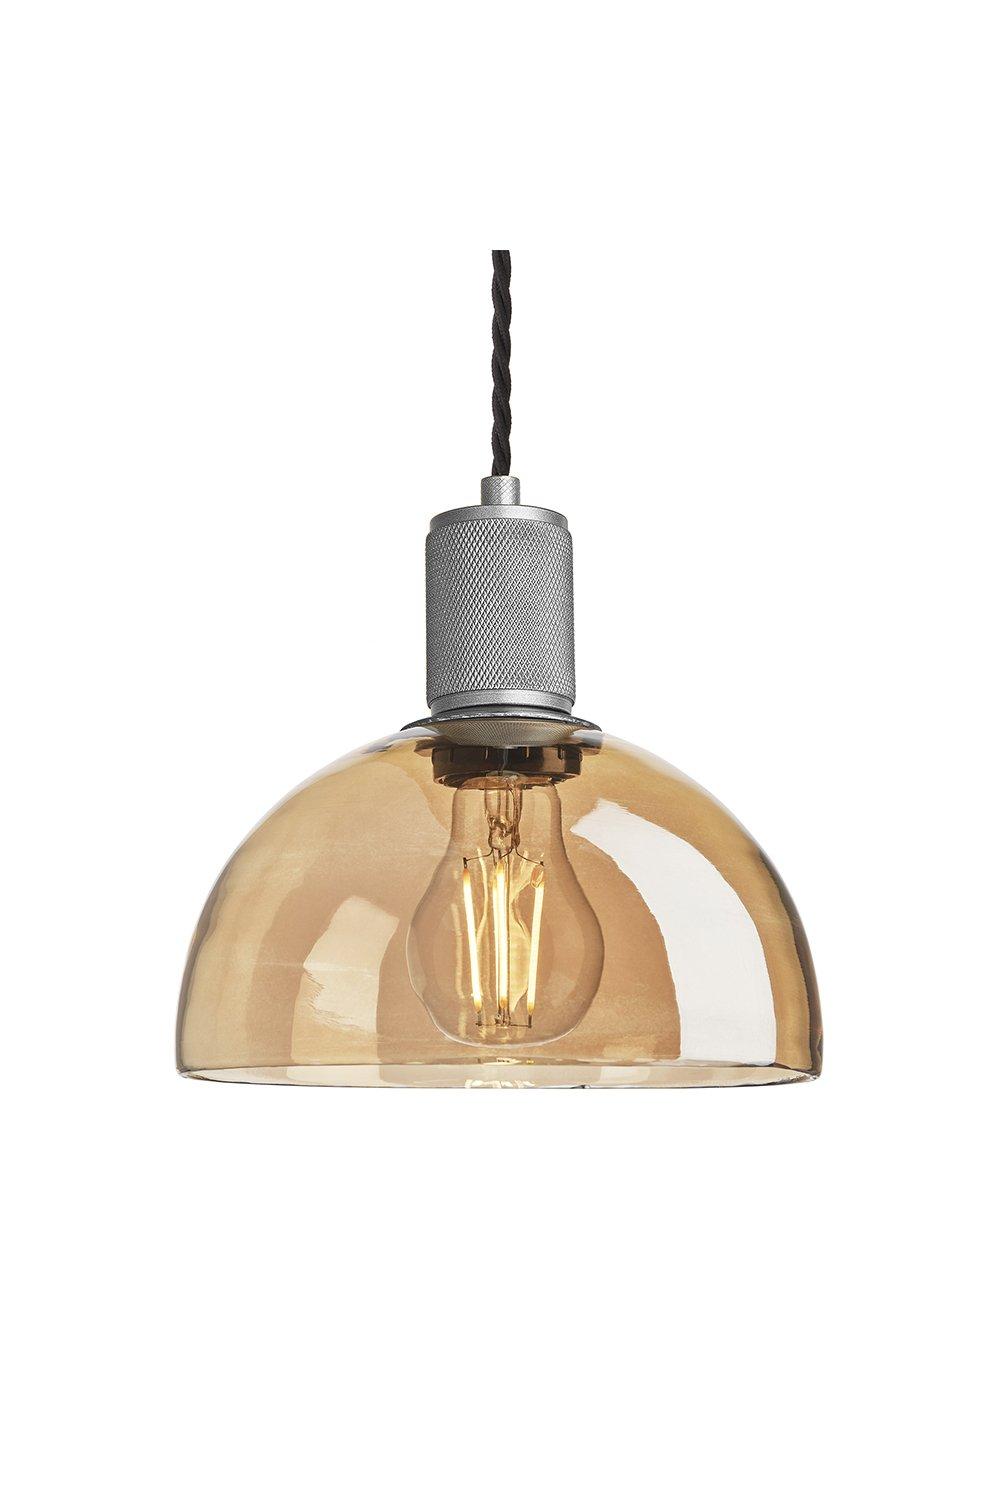 Knurled Tinted Glass Dome Pendant Light, 8 Inch, Amber, Pewter Holder